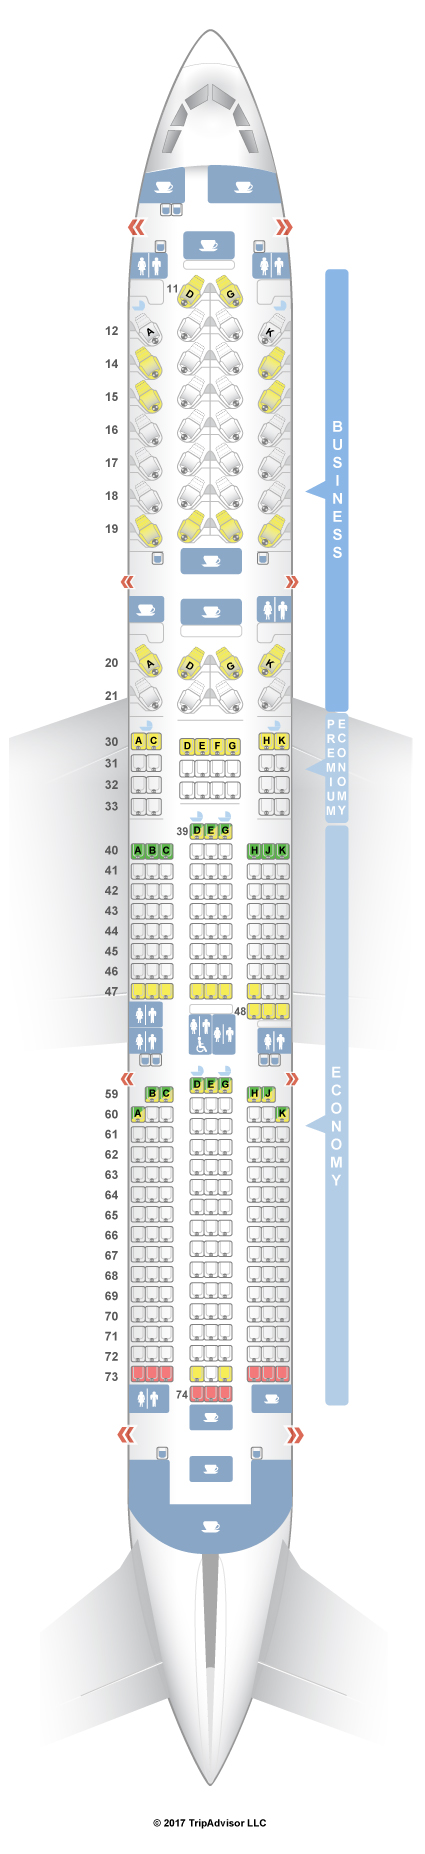 Airbus A350 Seating Chart